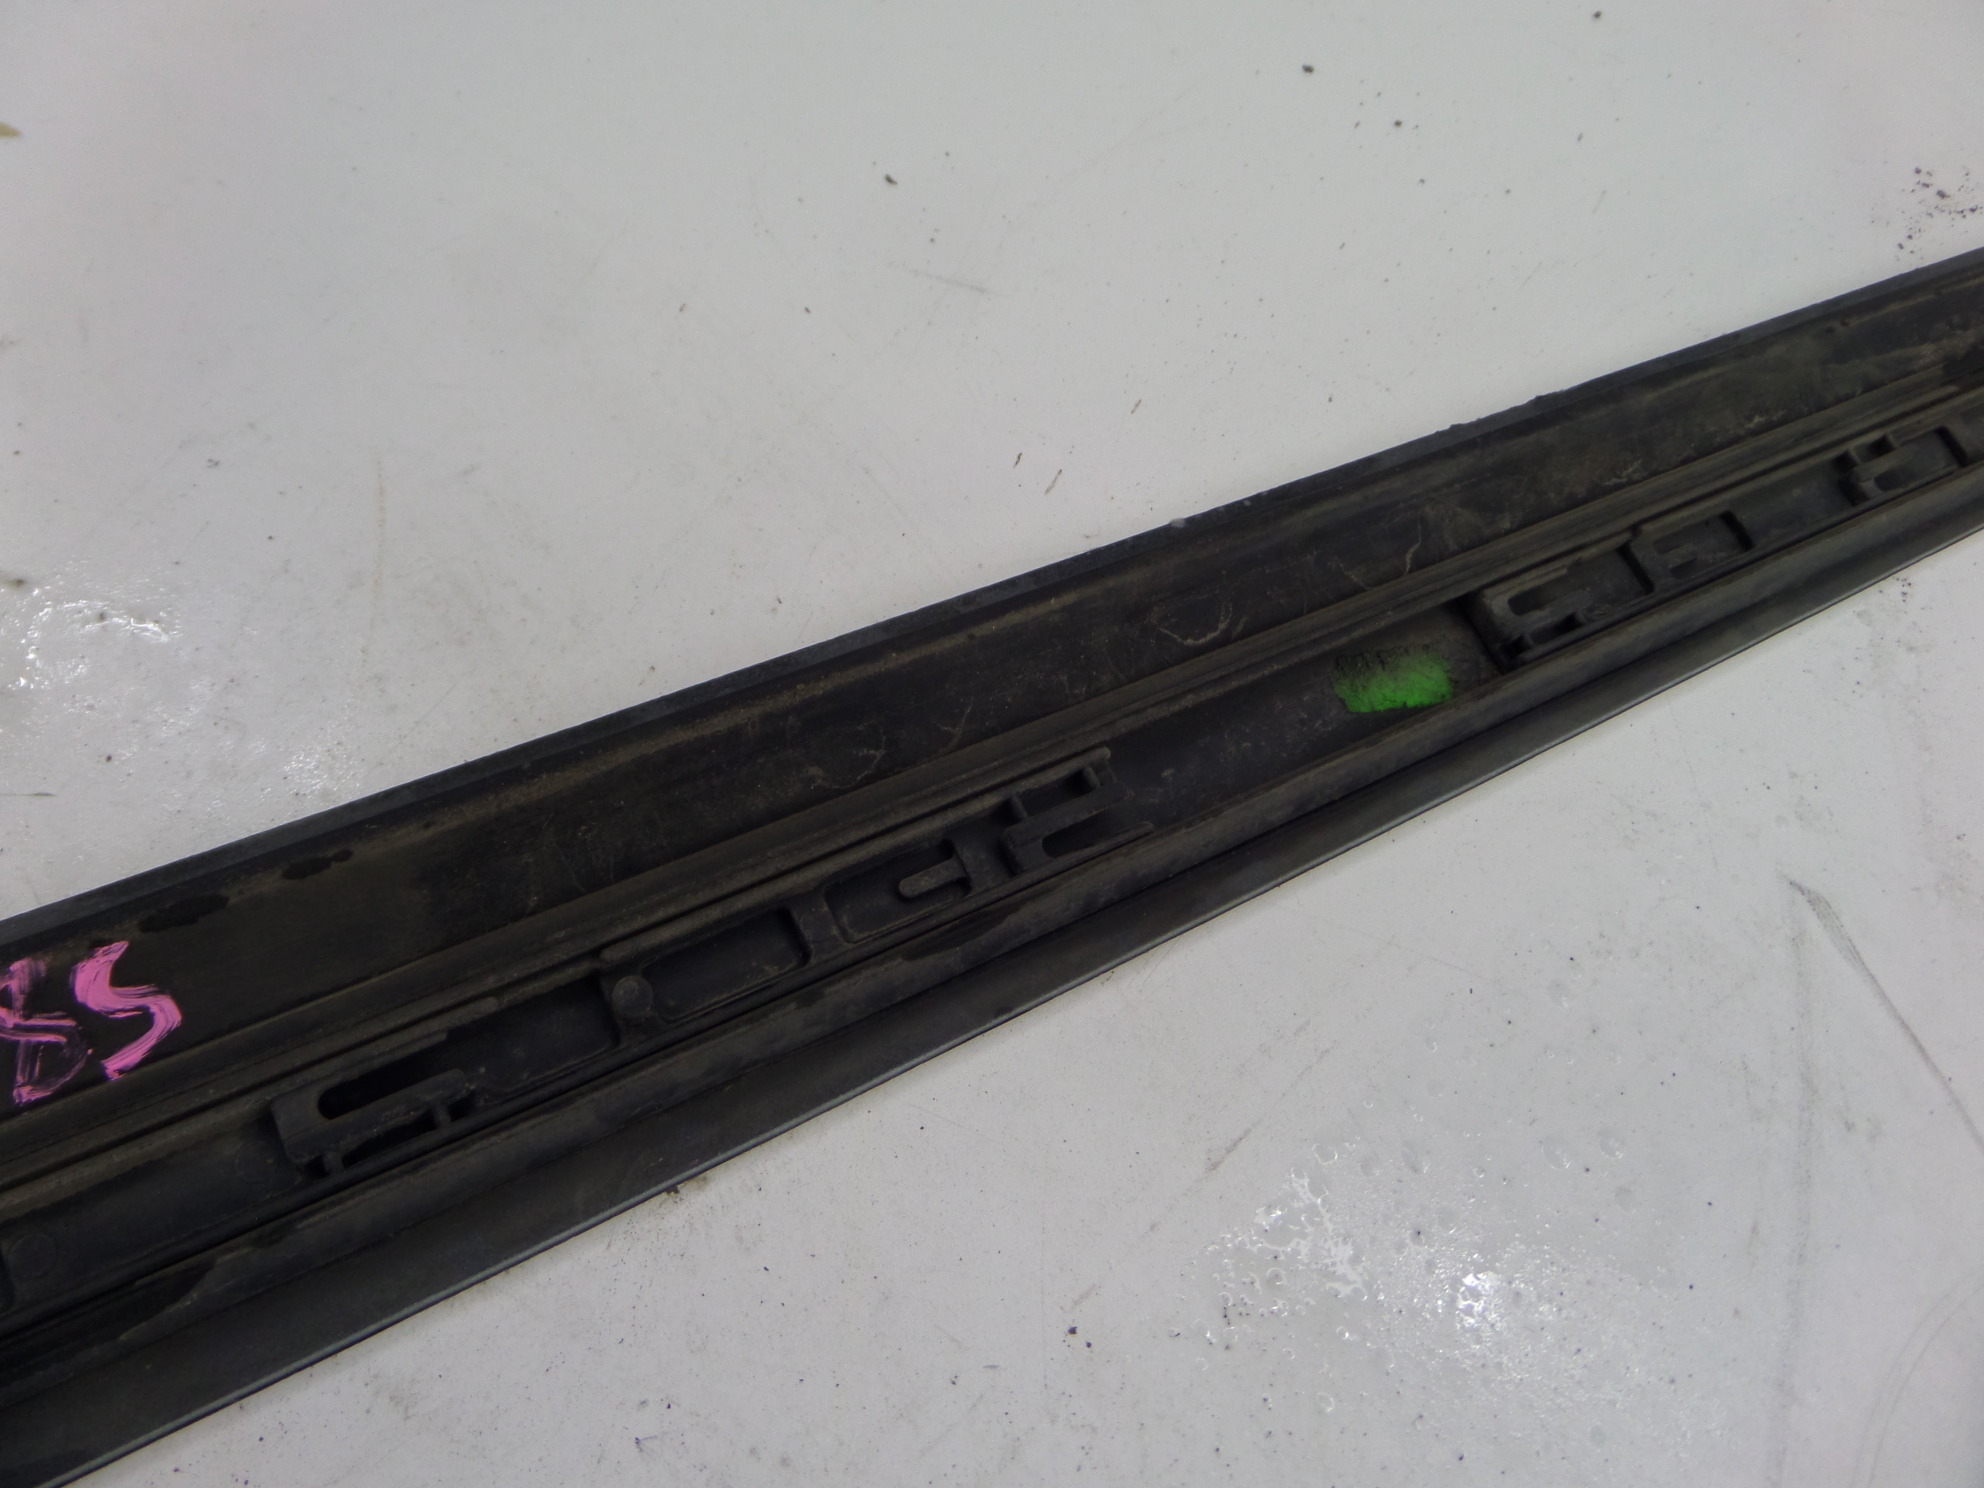 Audi A4 Right Front Lower Door Blade Molding White B7 05.508 OEM eBay